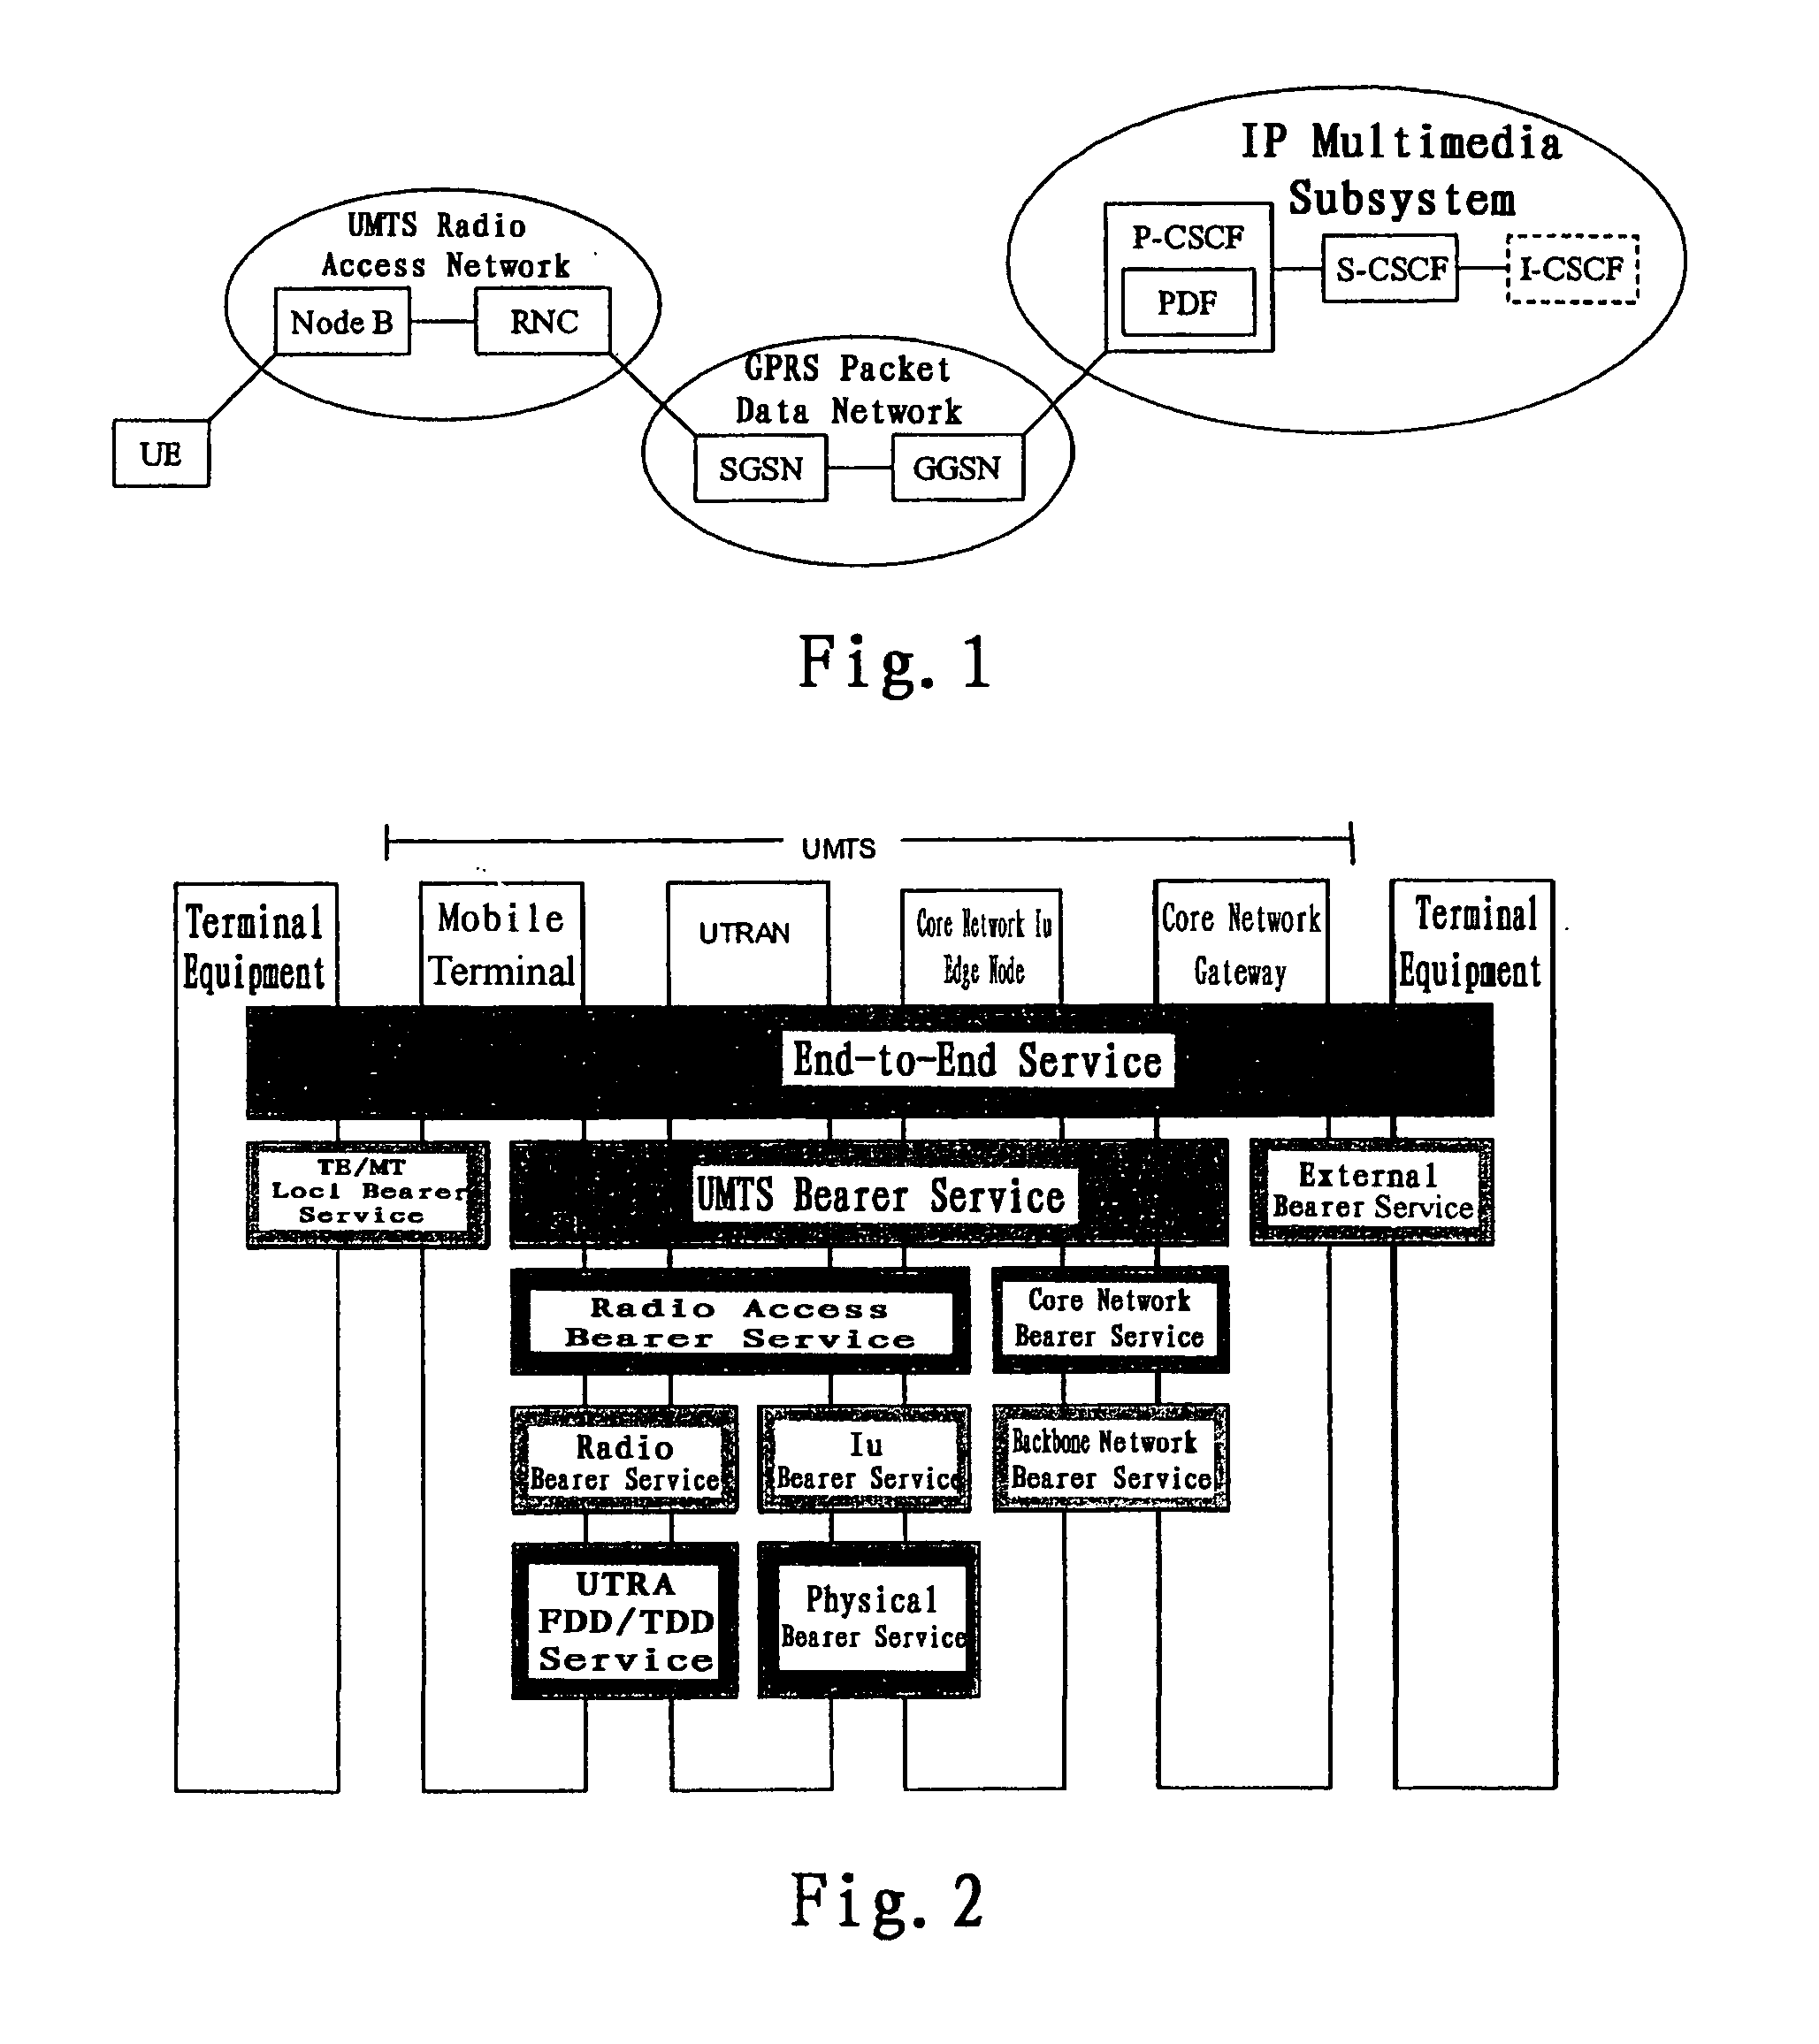 Method Of Radio Access Bearer For Ip Multimedia Session In Umts Network